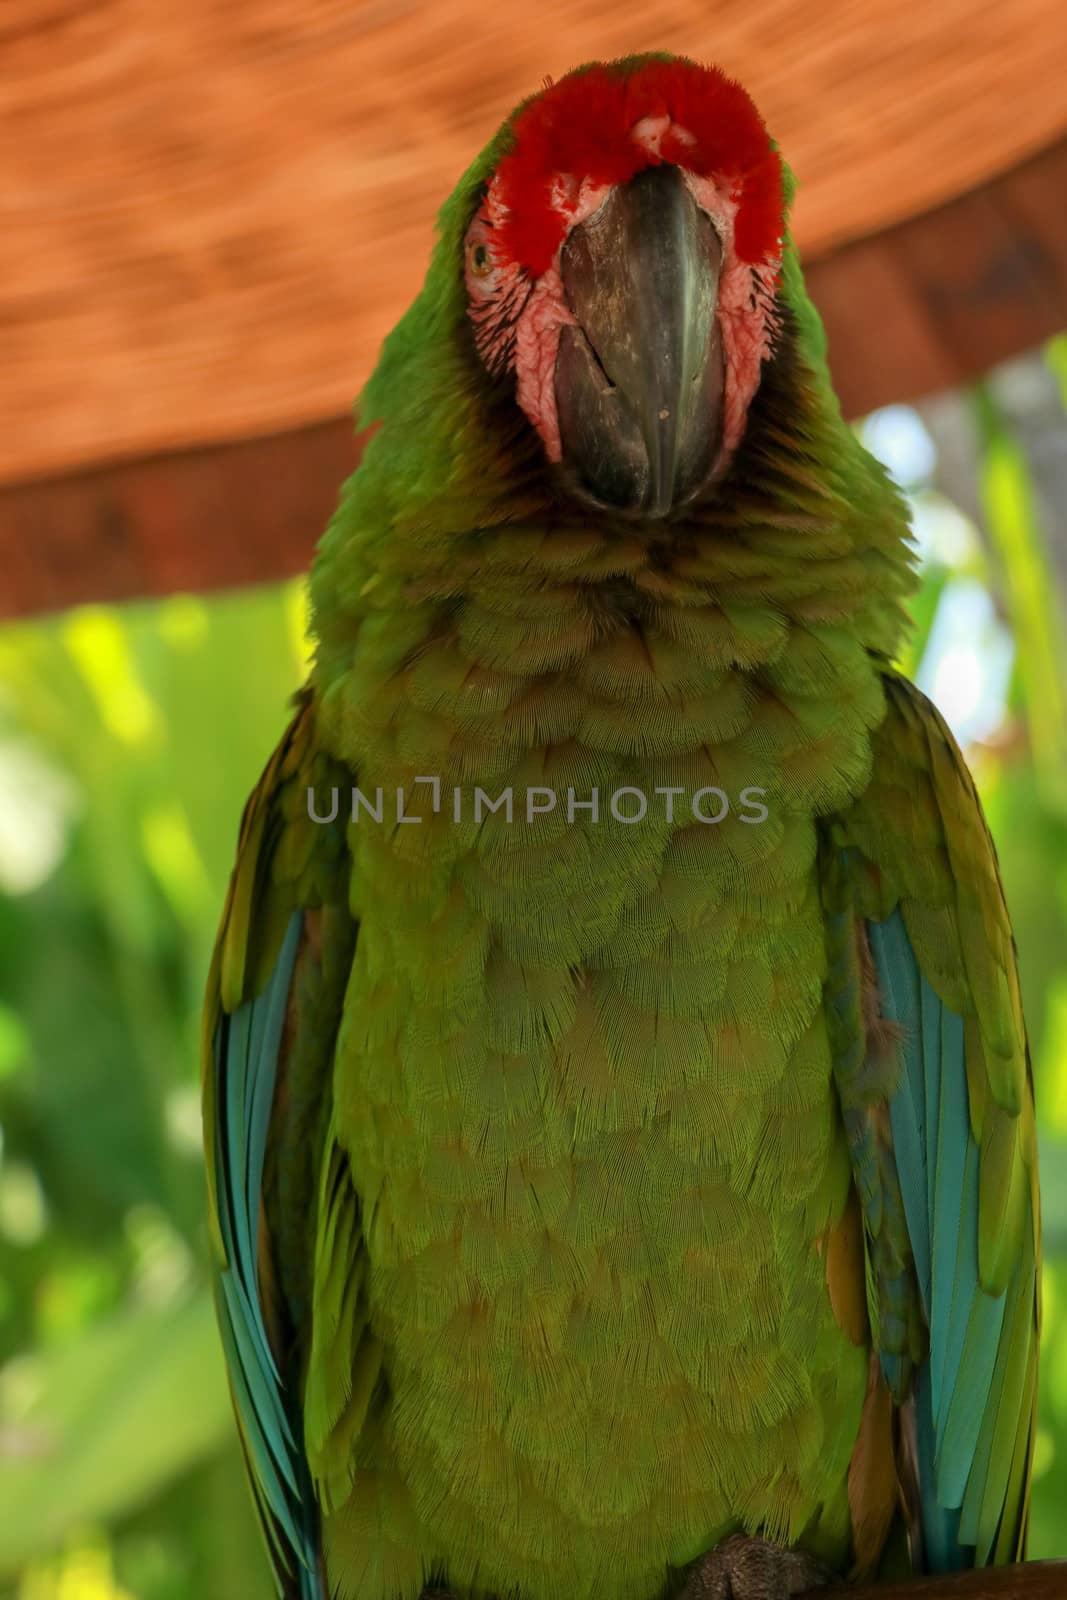 The Great Green Macaw, Ara ambiguus, also known as Buffon's Macaw or the Great Military Macaw by Sanatana2008